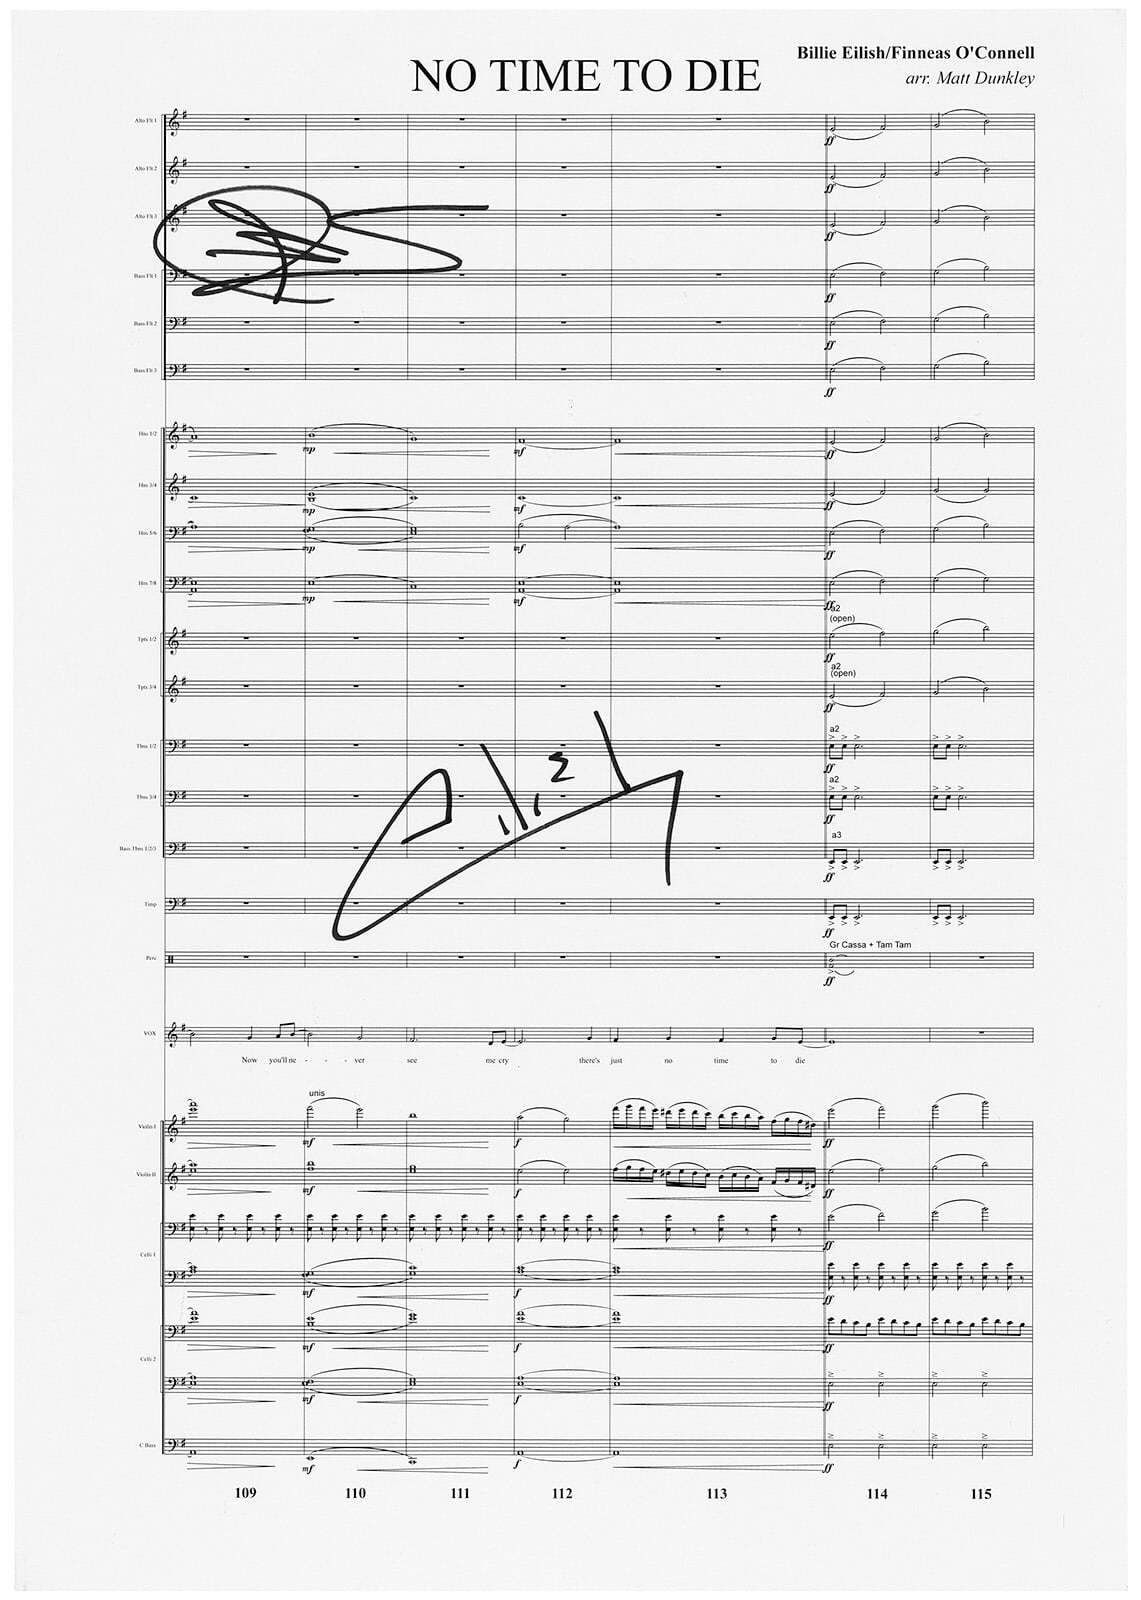 NO TIME TO DIE (2021) NO TIME TO DIE SONG PAGE WITH LYRICS SIGNED BY BILLIE EILISH AND FINNEAS O'CONNELL AND  NO TIME TO DIE THEME MUSIC SHEET SIGNED BY HANS ZIMMER, STEVE MAZZARO AND JOHNNY MARR